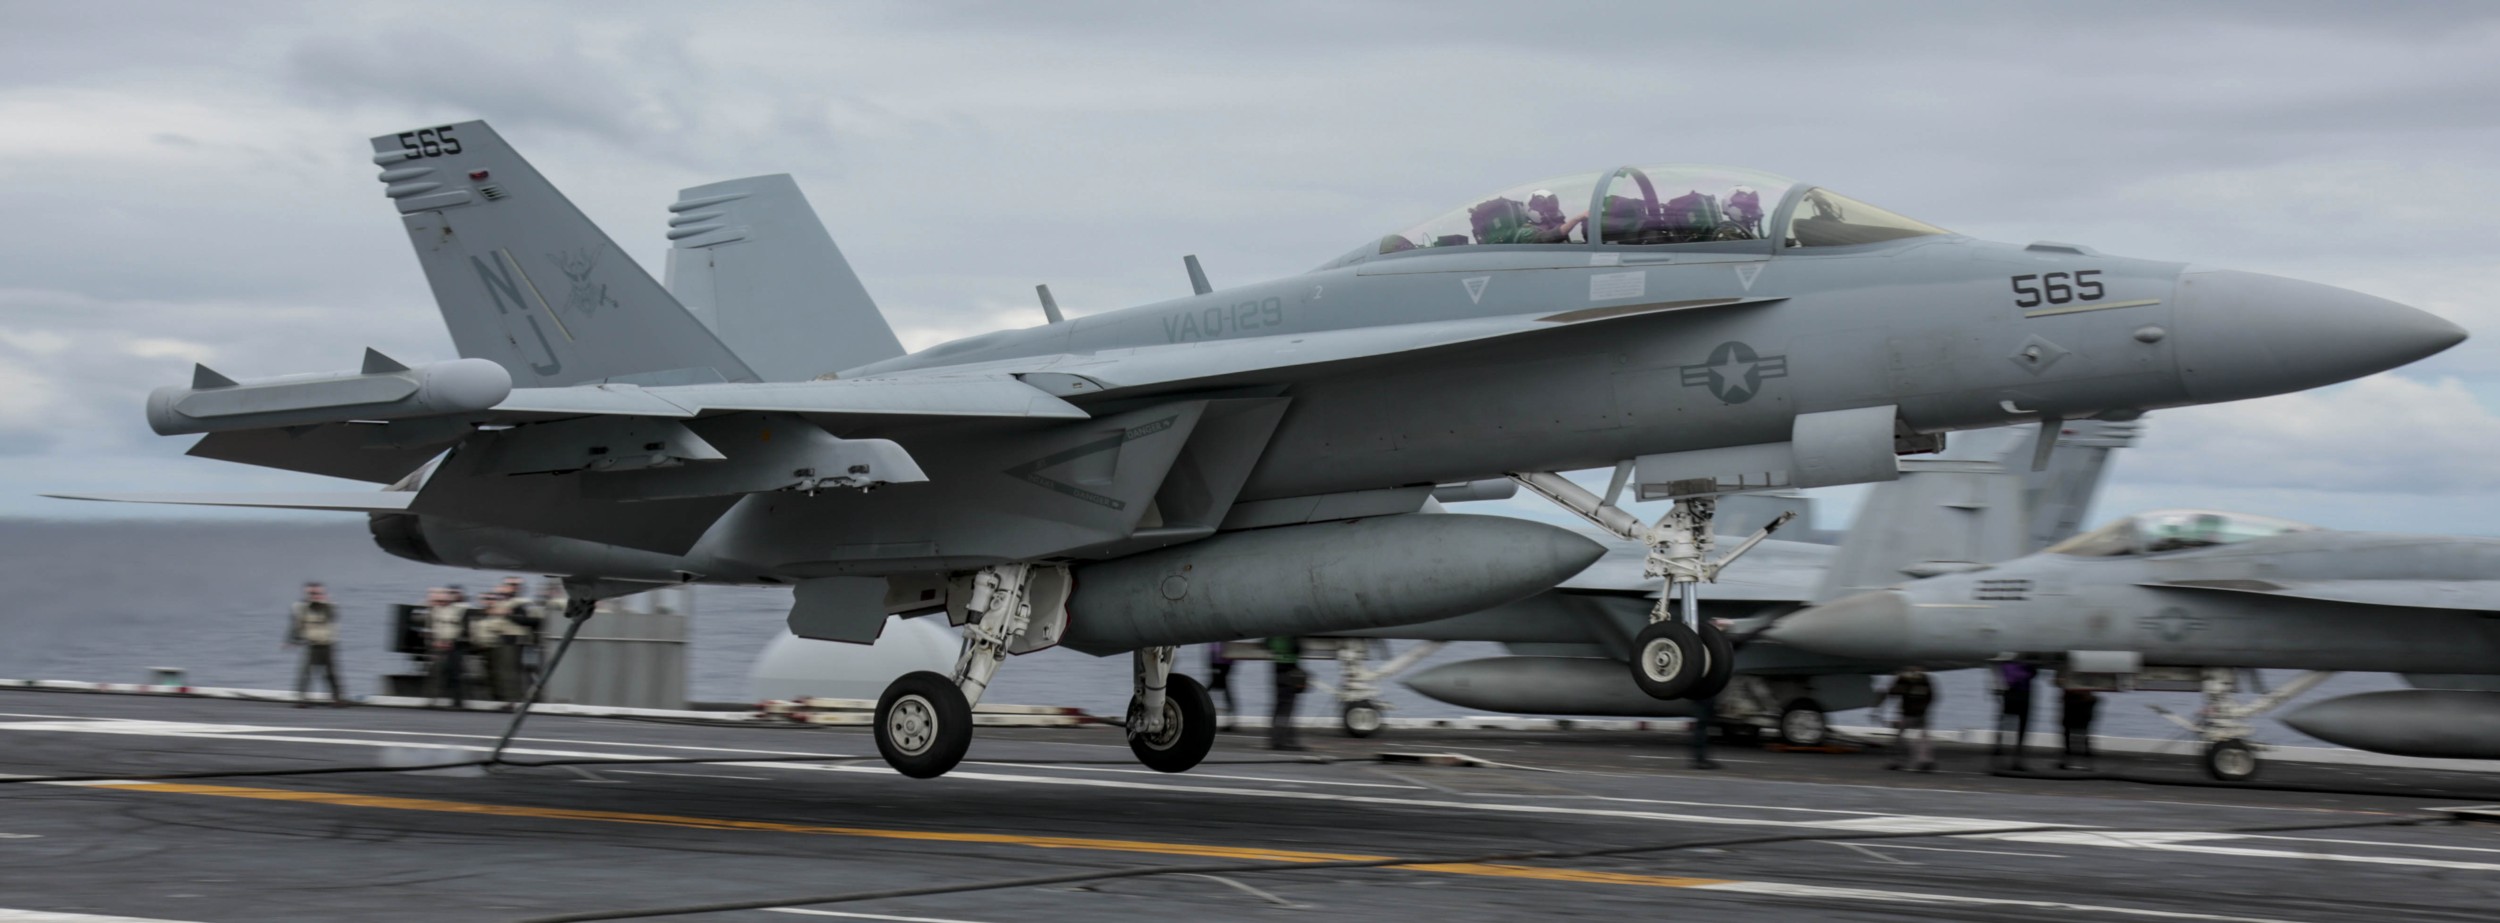 vaq-129 vikings electronic attack squadron fleet replacement frs us navy ea-18g growler 16